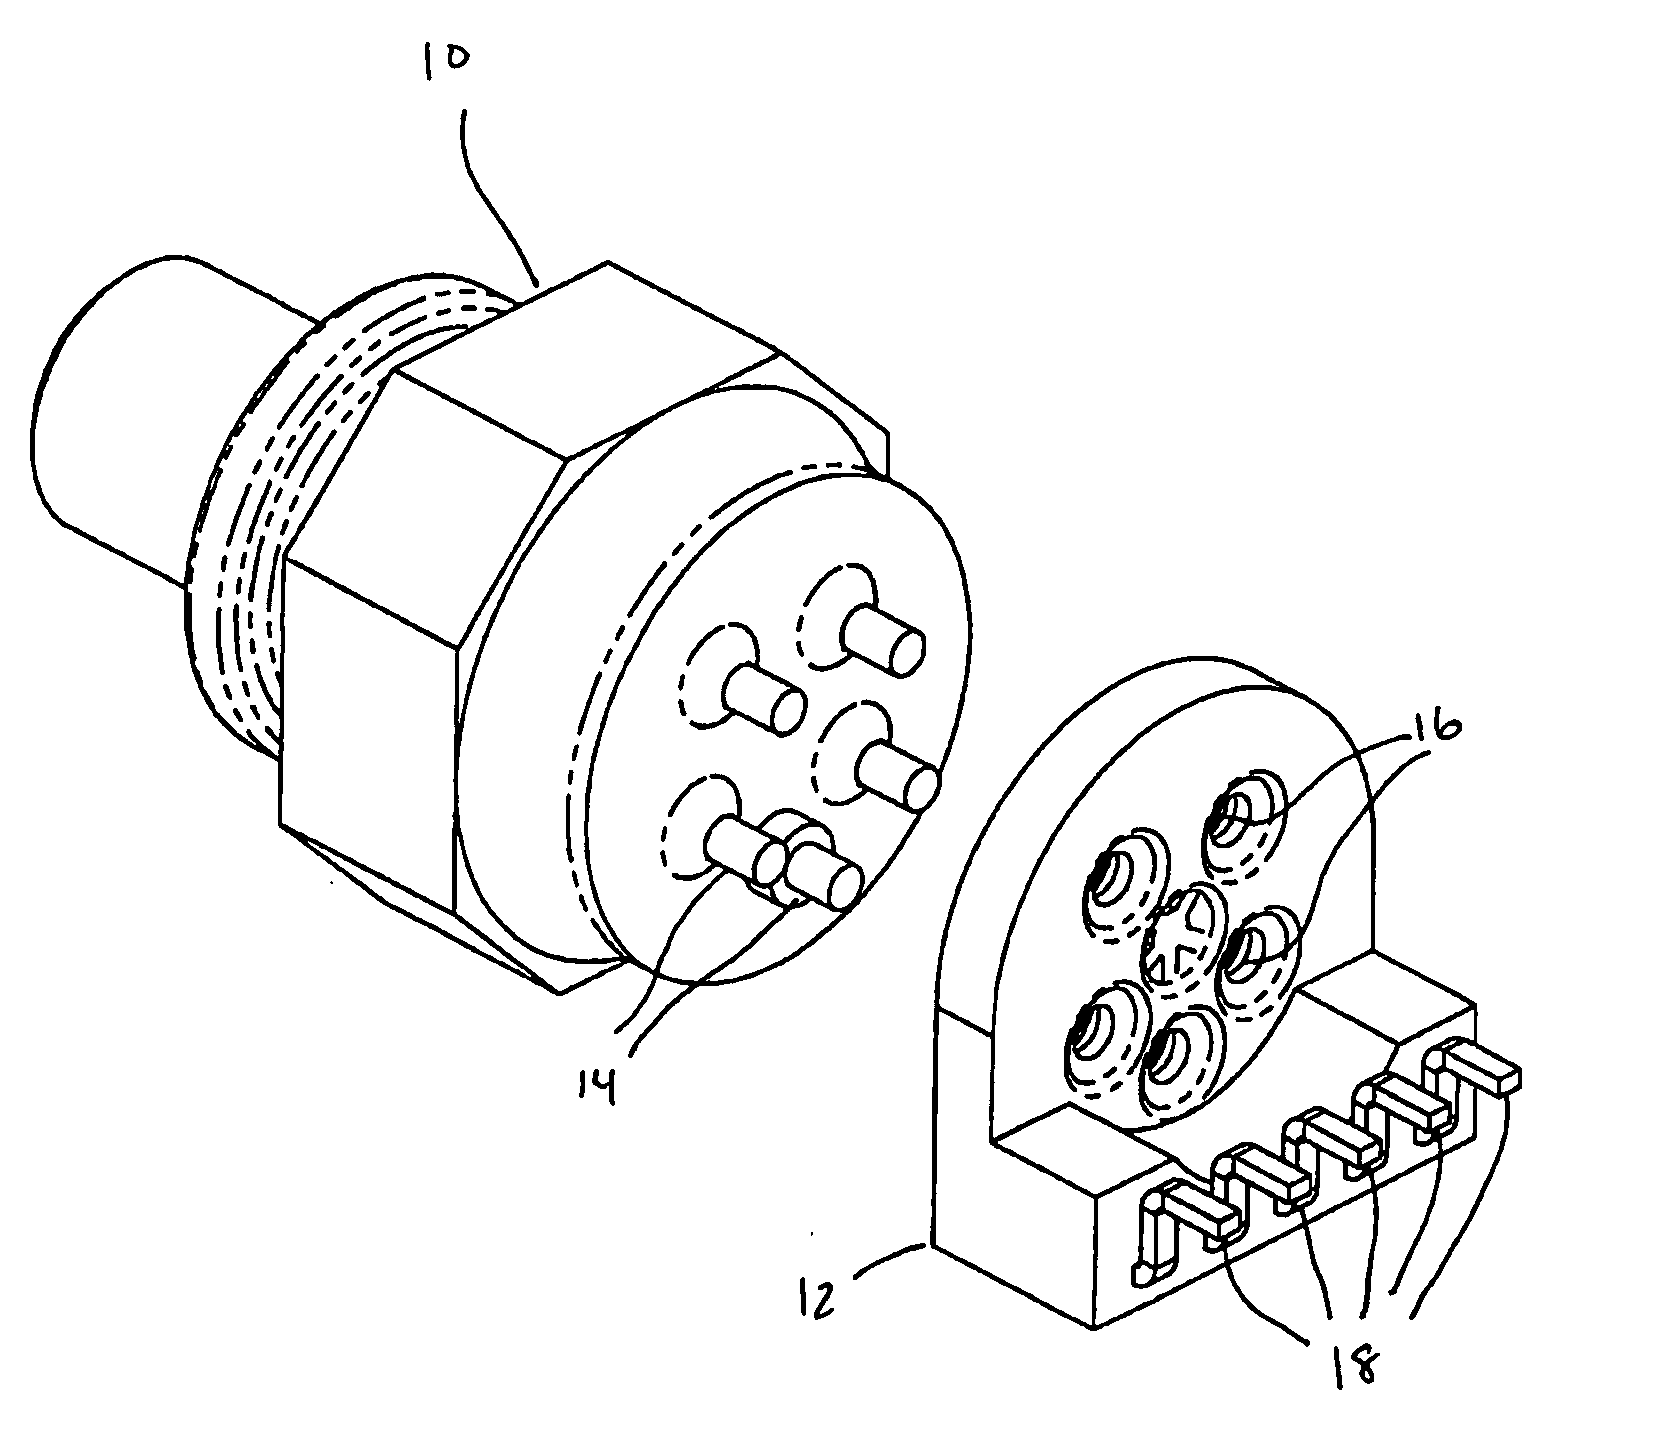 Methods for manufacturing lead frame connectors for optical transceiver modules